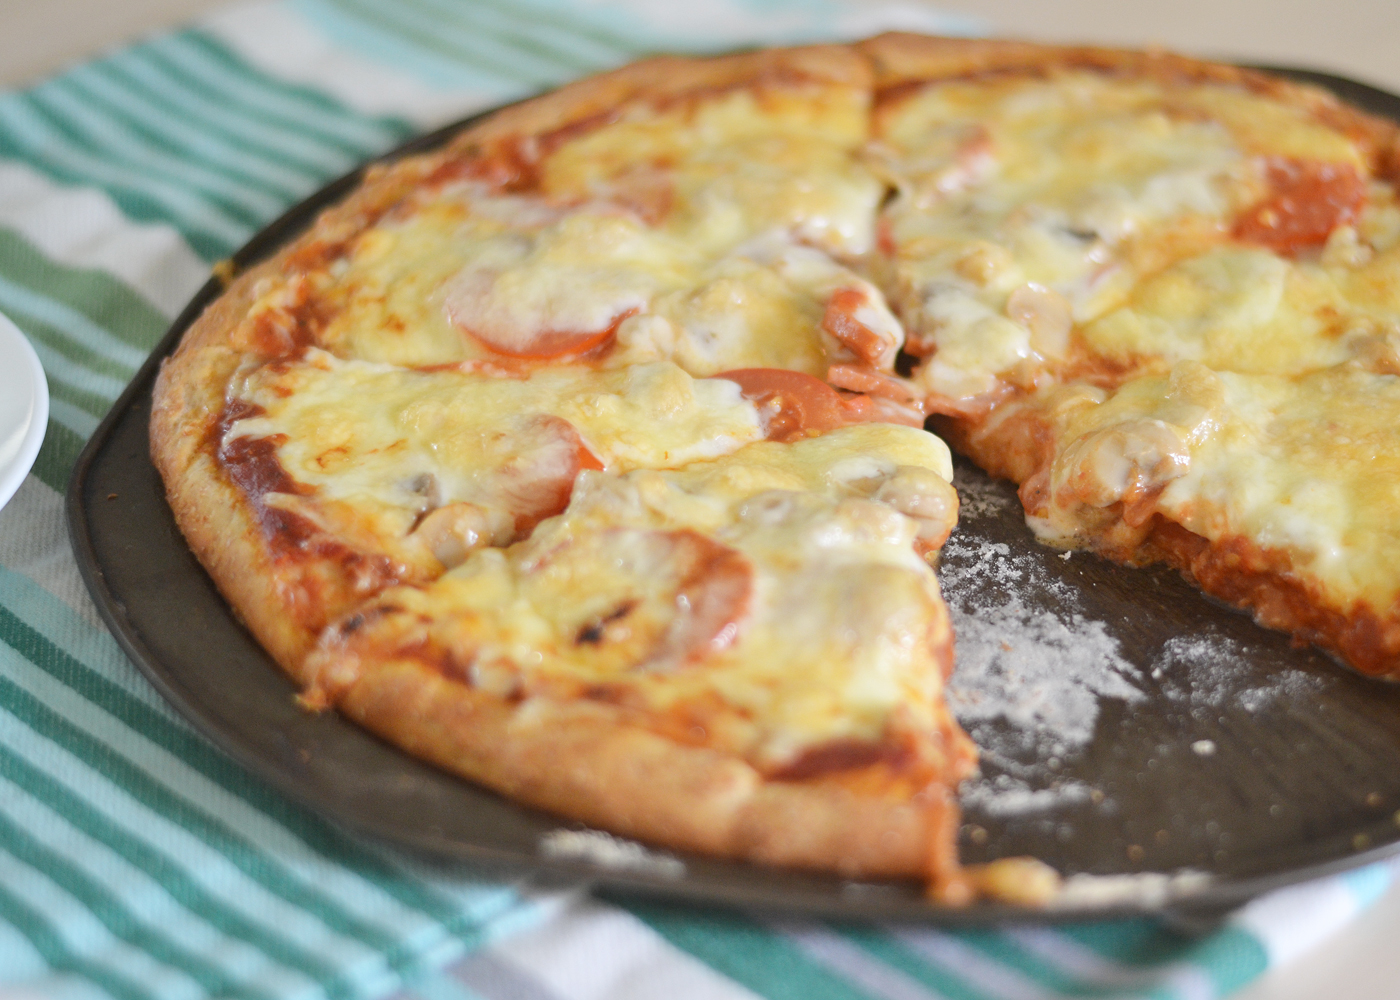 Whole What Pizza Recipe from thediymommy.wpsc.dev